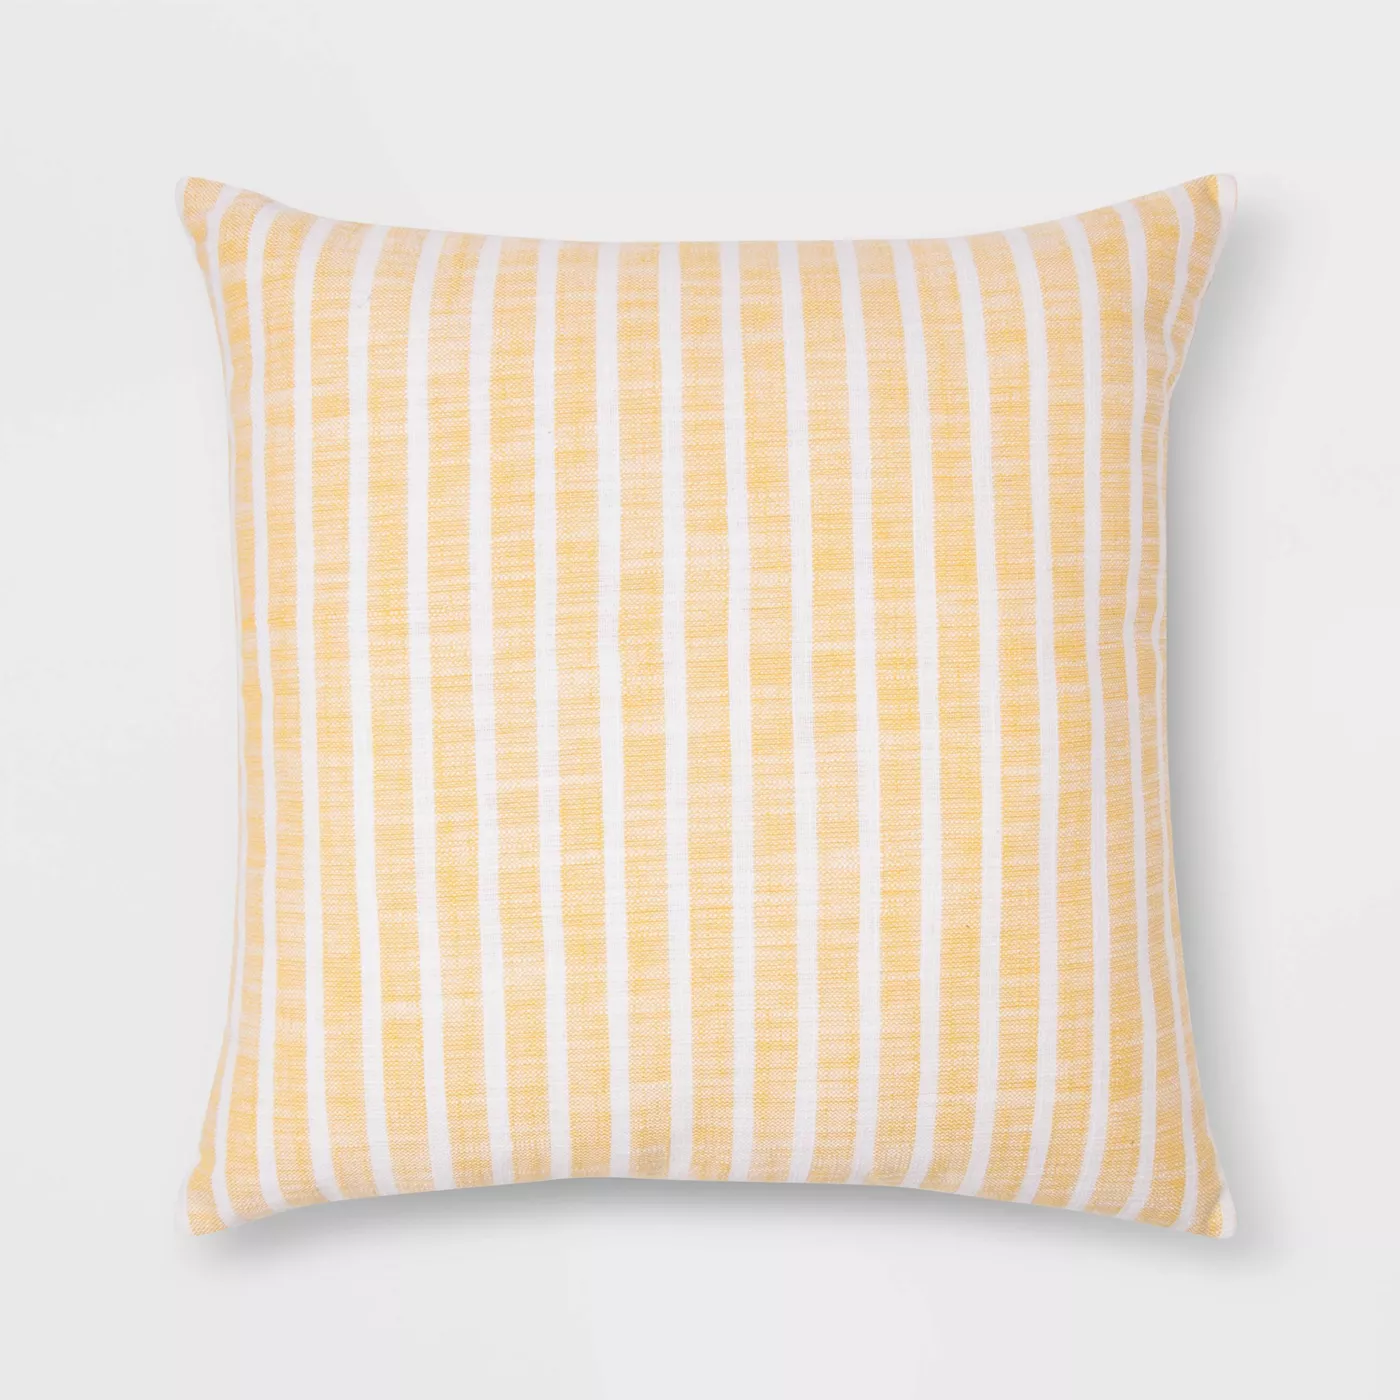 Woven Stripe Square Pillow - Threshold™ - image 1 of 3